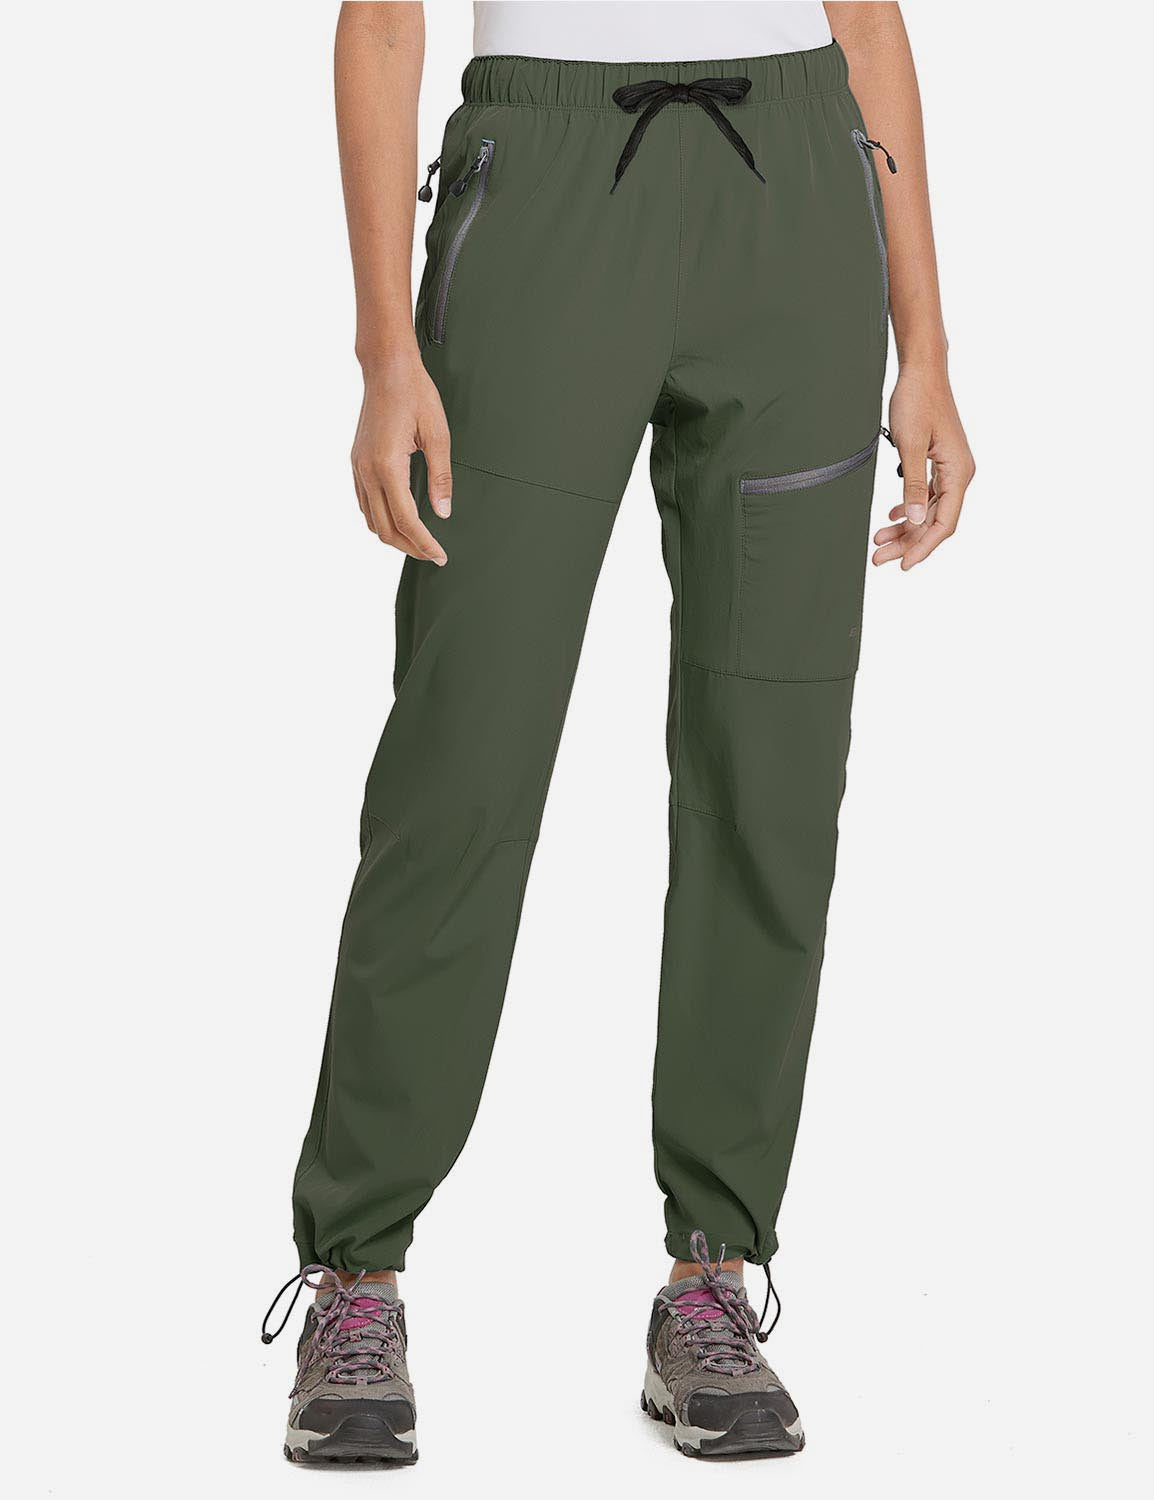 Women's Hiking Pants with 4 Pockets Quick Dry Lightweight Joggers